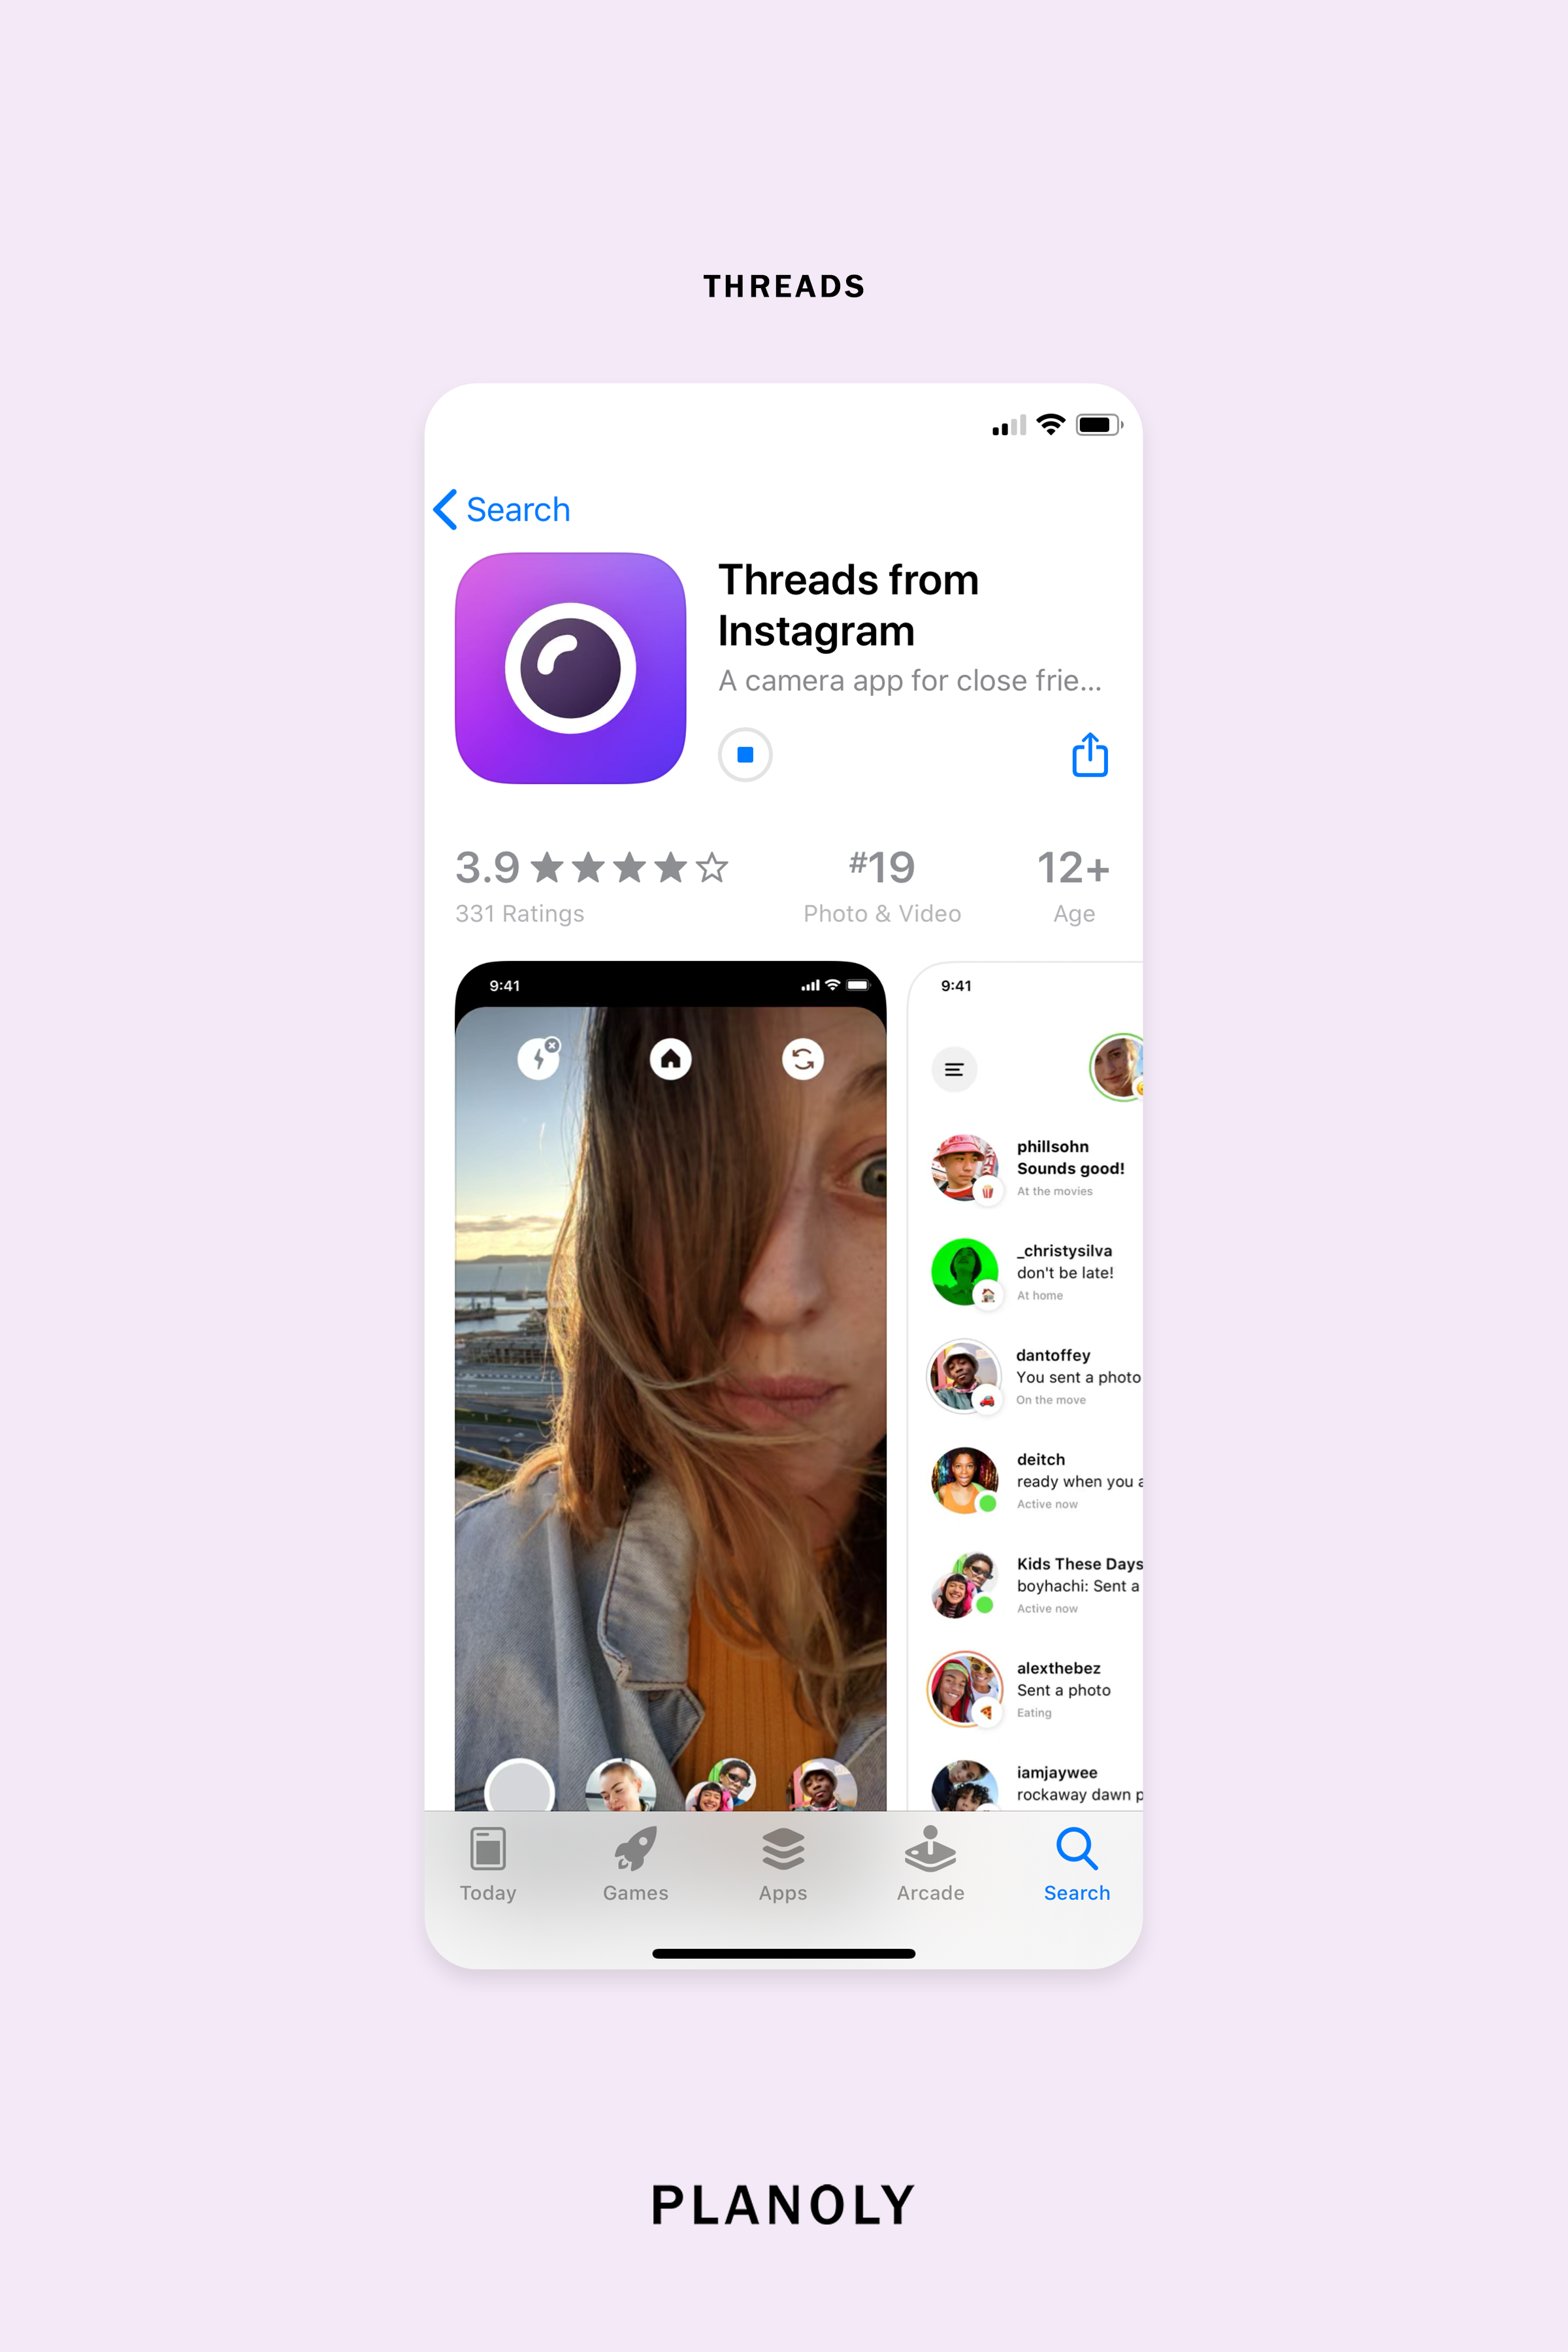 Instagram Introduces Threads, Their Brand New Messaging App